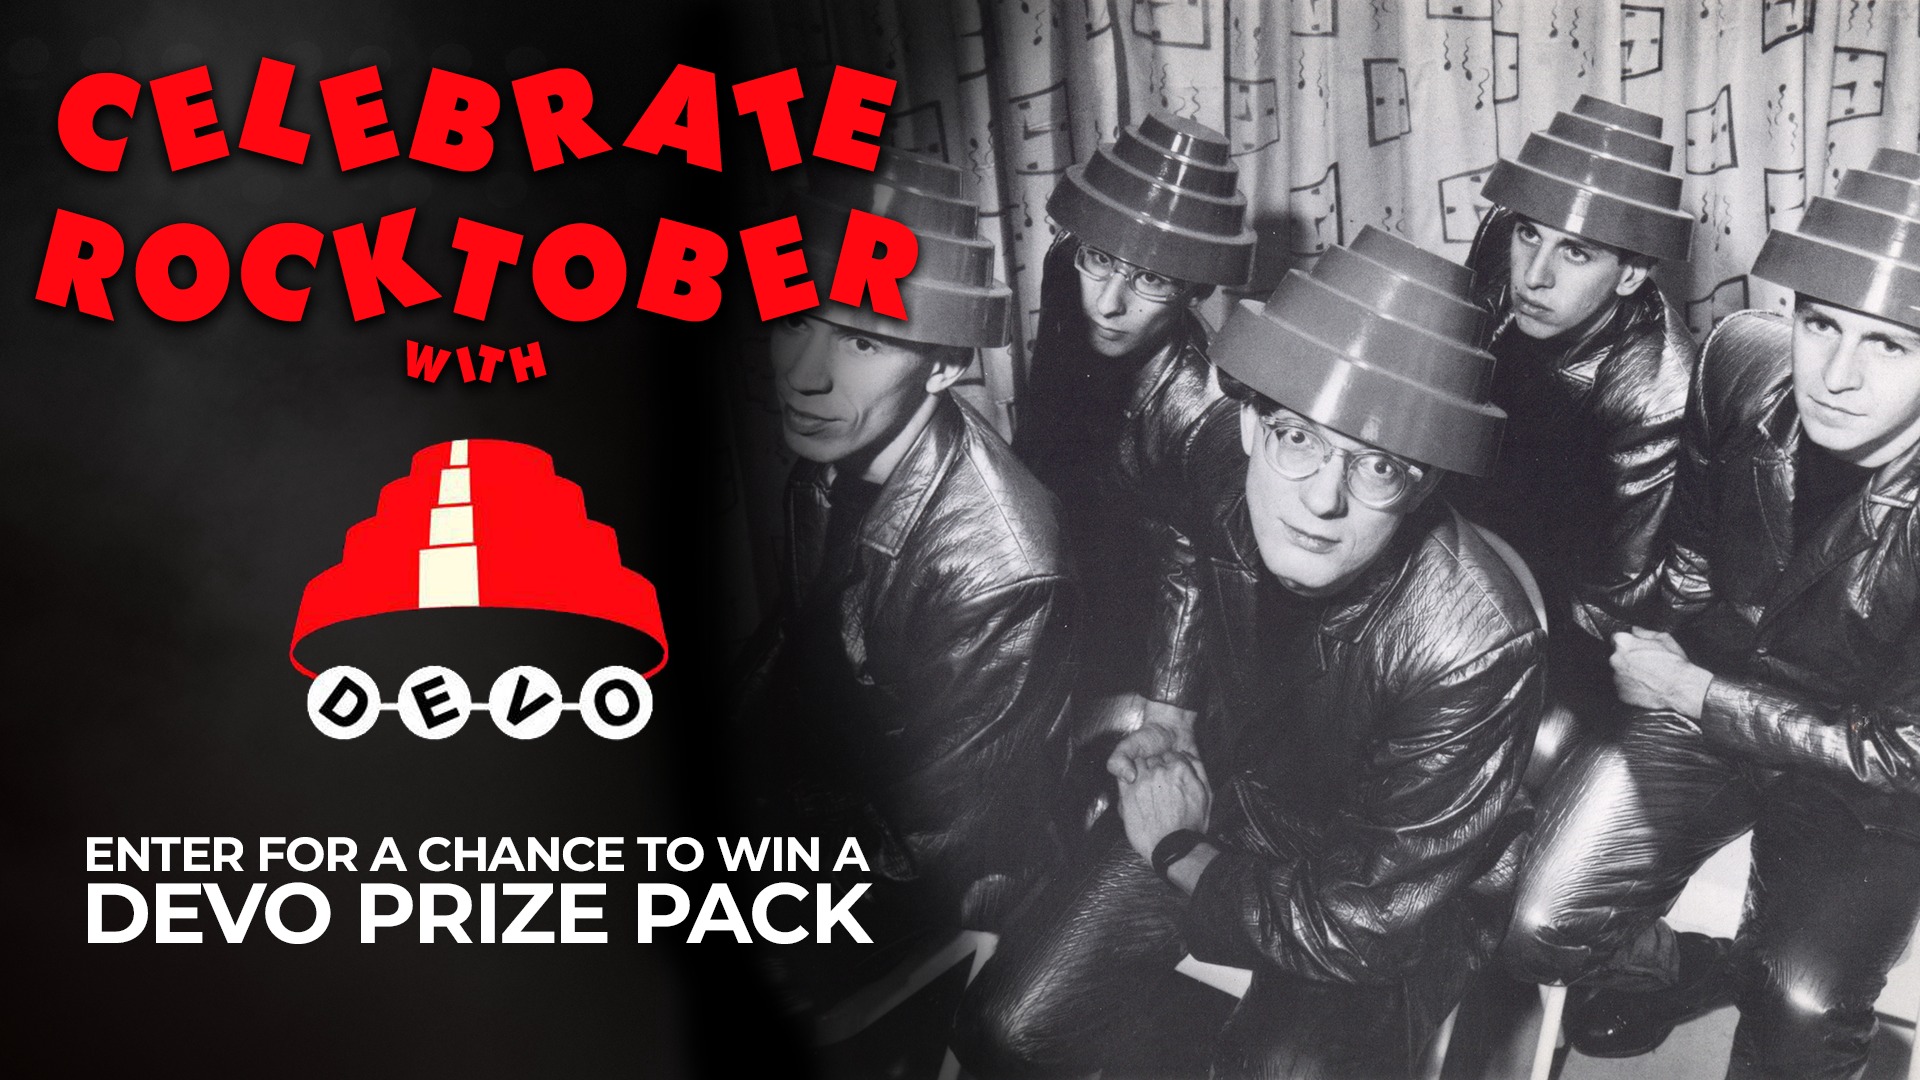 Celebrate Rocktober With Devo For A Chance To Win Prizes